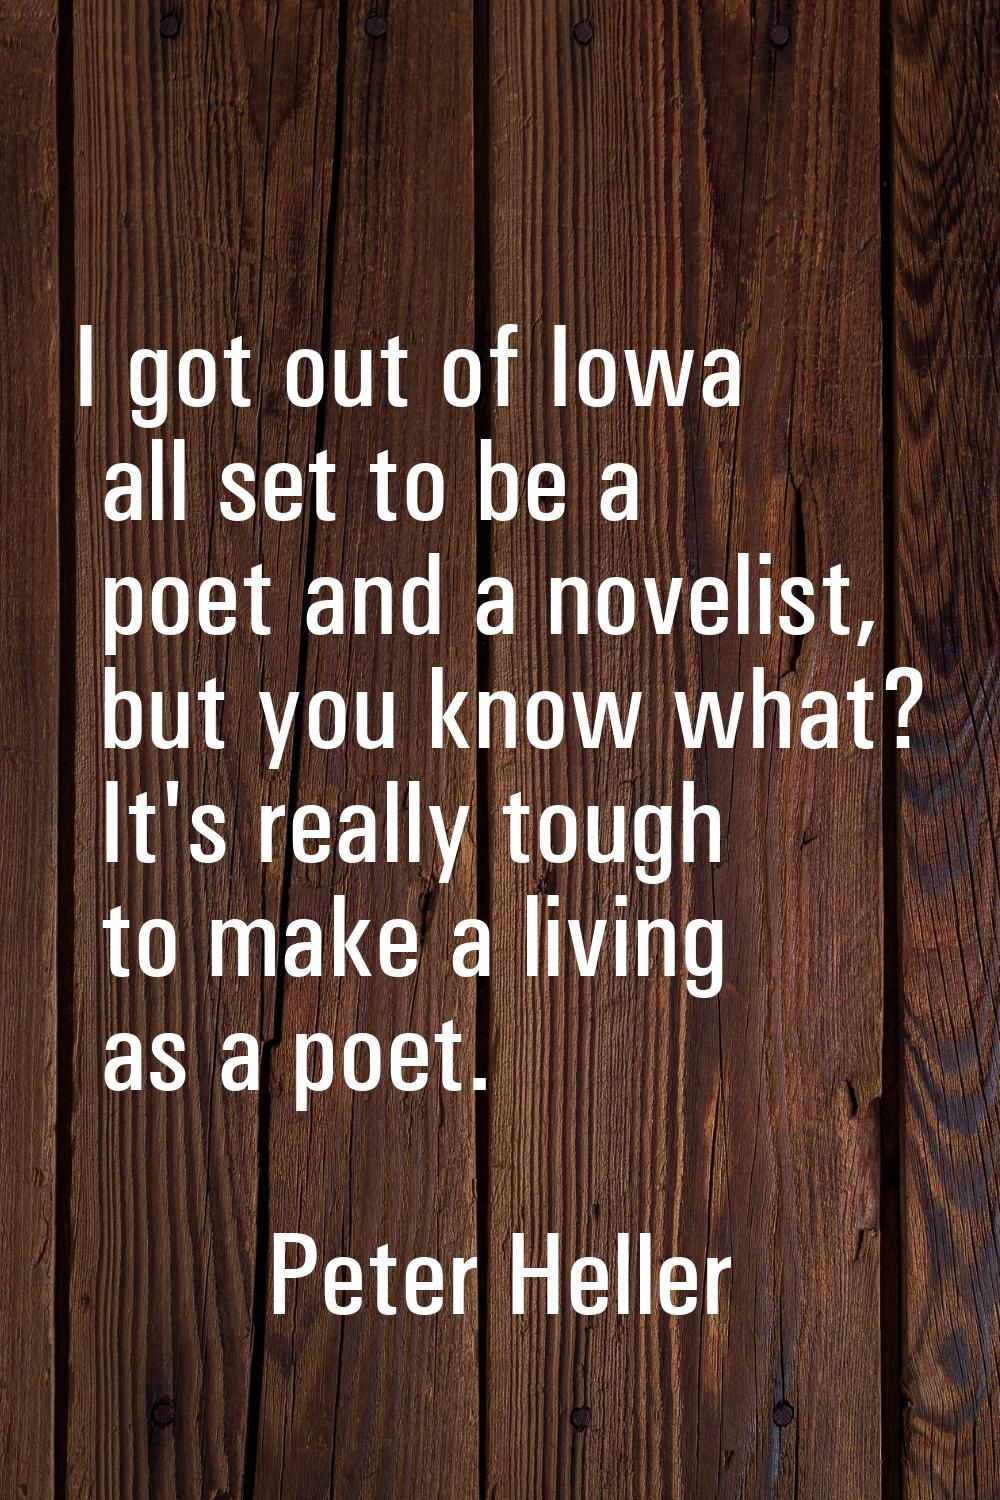 I got out of Iowa all set to be a poet and a novelist, but you know what? It's really tough to make